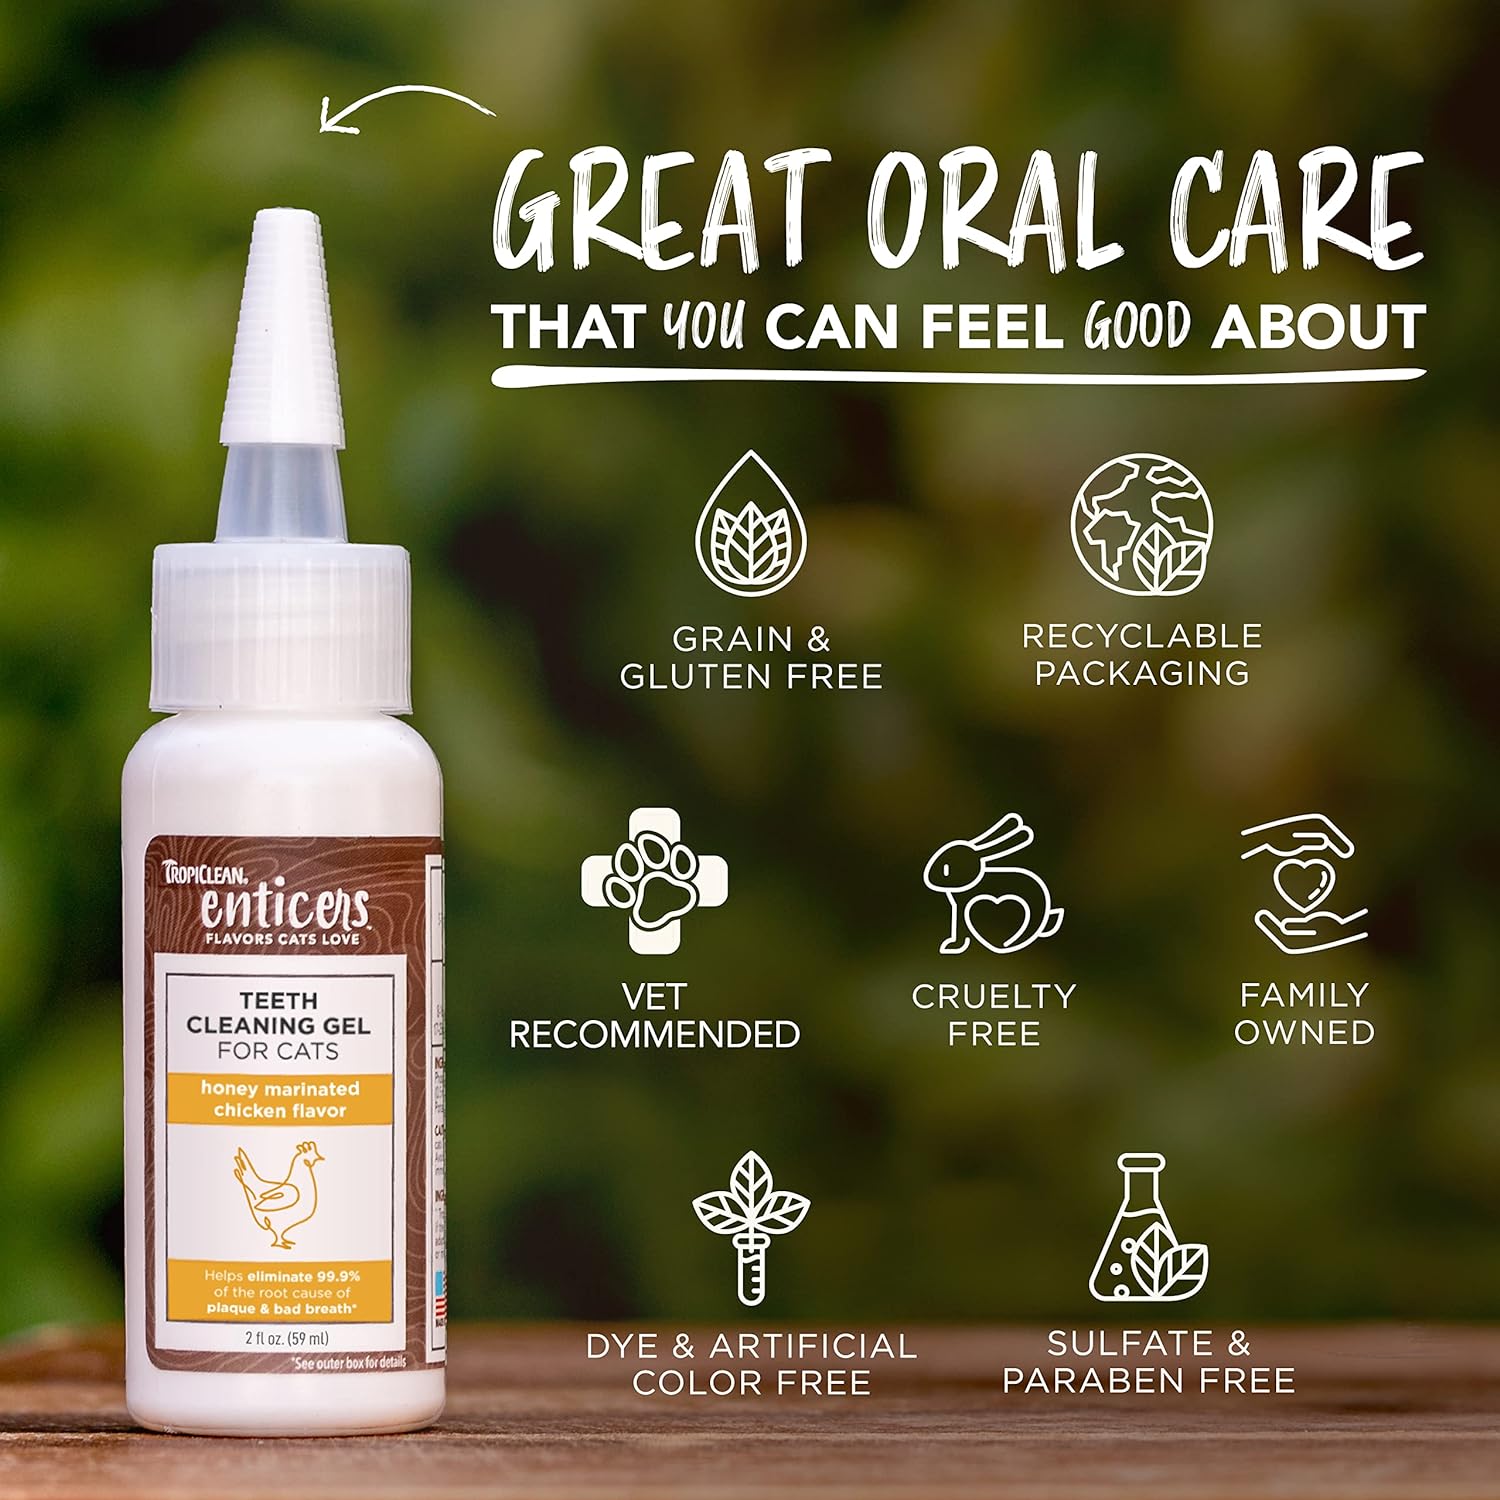 TropiClean Enticers Teeth Cleaning Gel for Cats - Honey Marinated Chicken Flavor, 2oz - Dental Gel - Helps Remove The Source of Bad Breath and Plaque- Flavor Cats Love - No Brushing :Pet Supplies